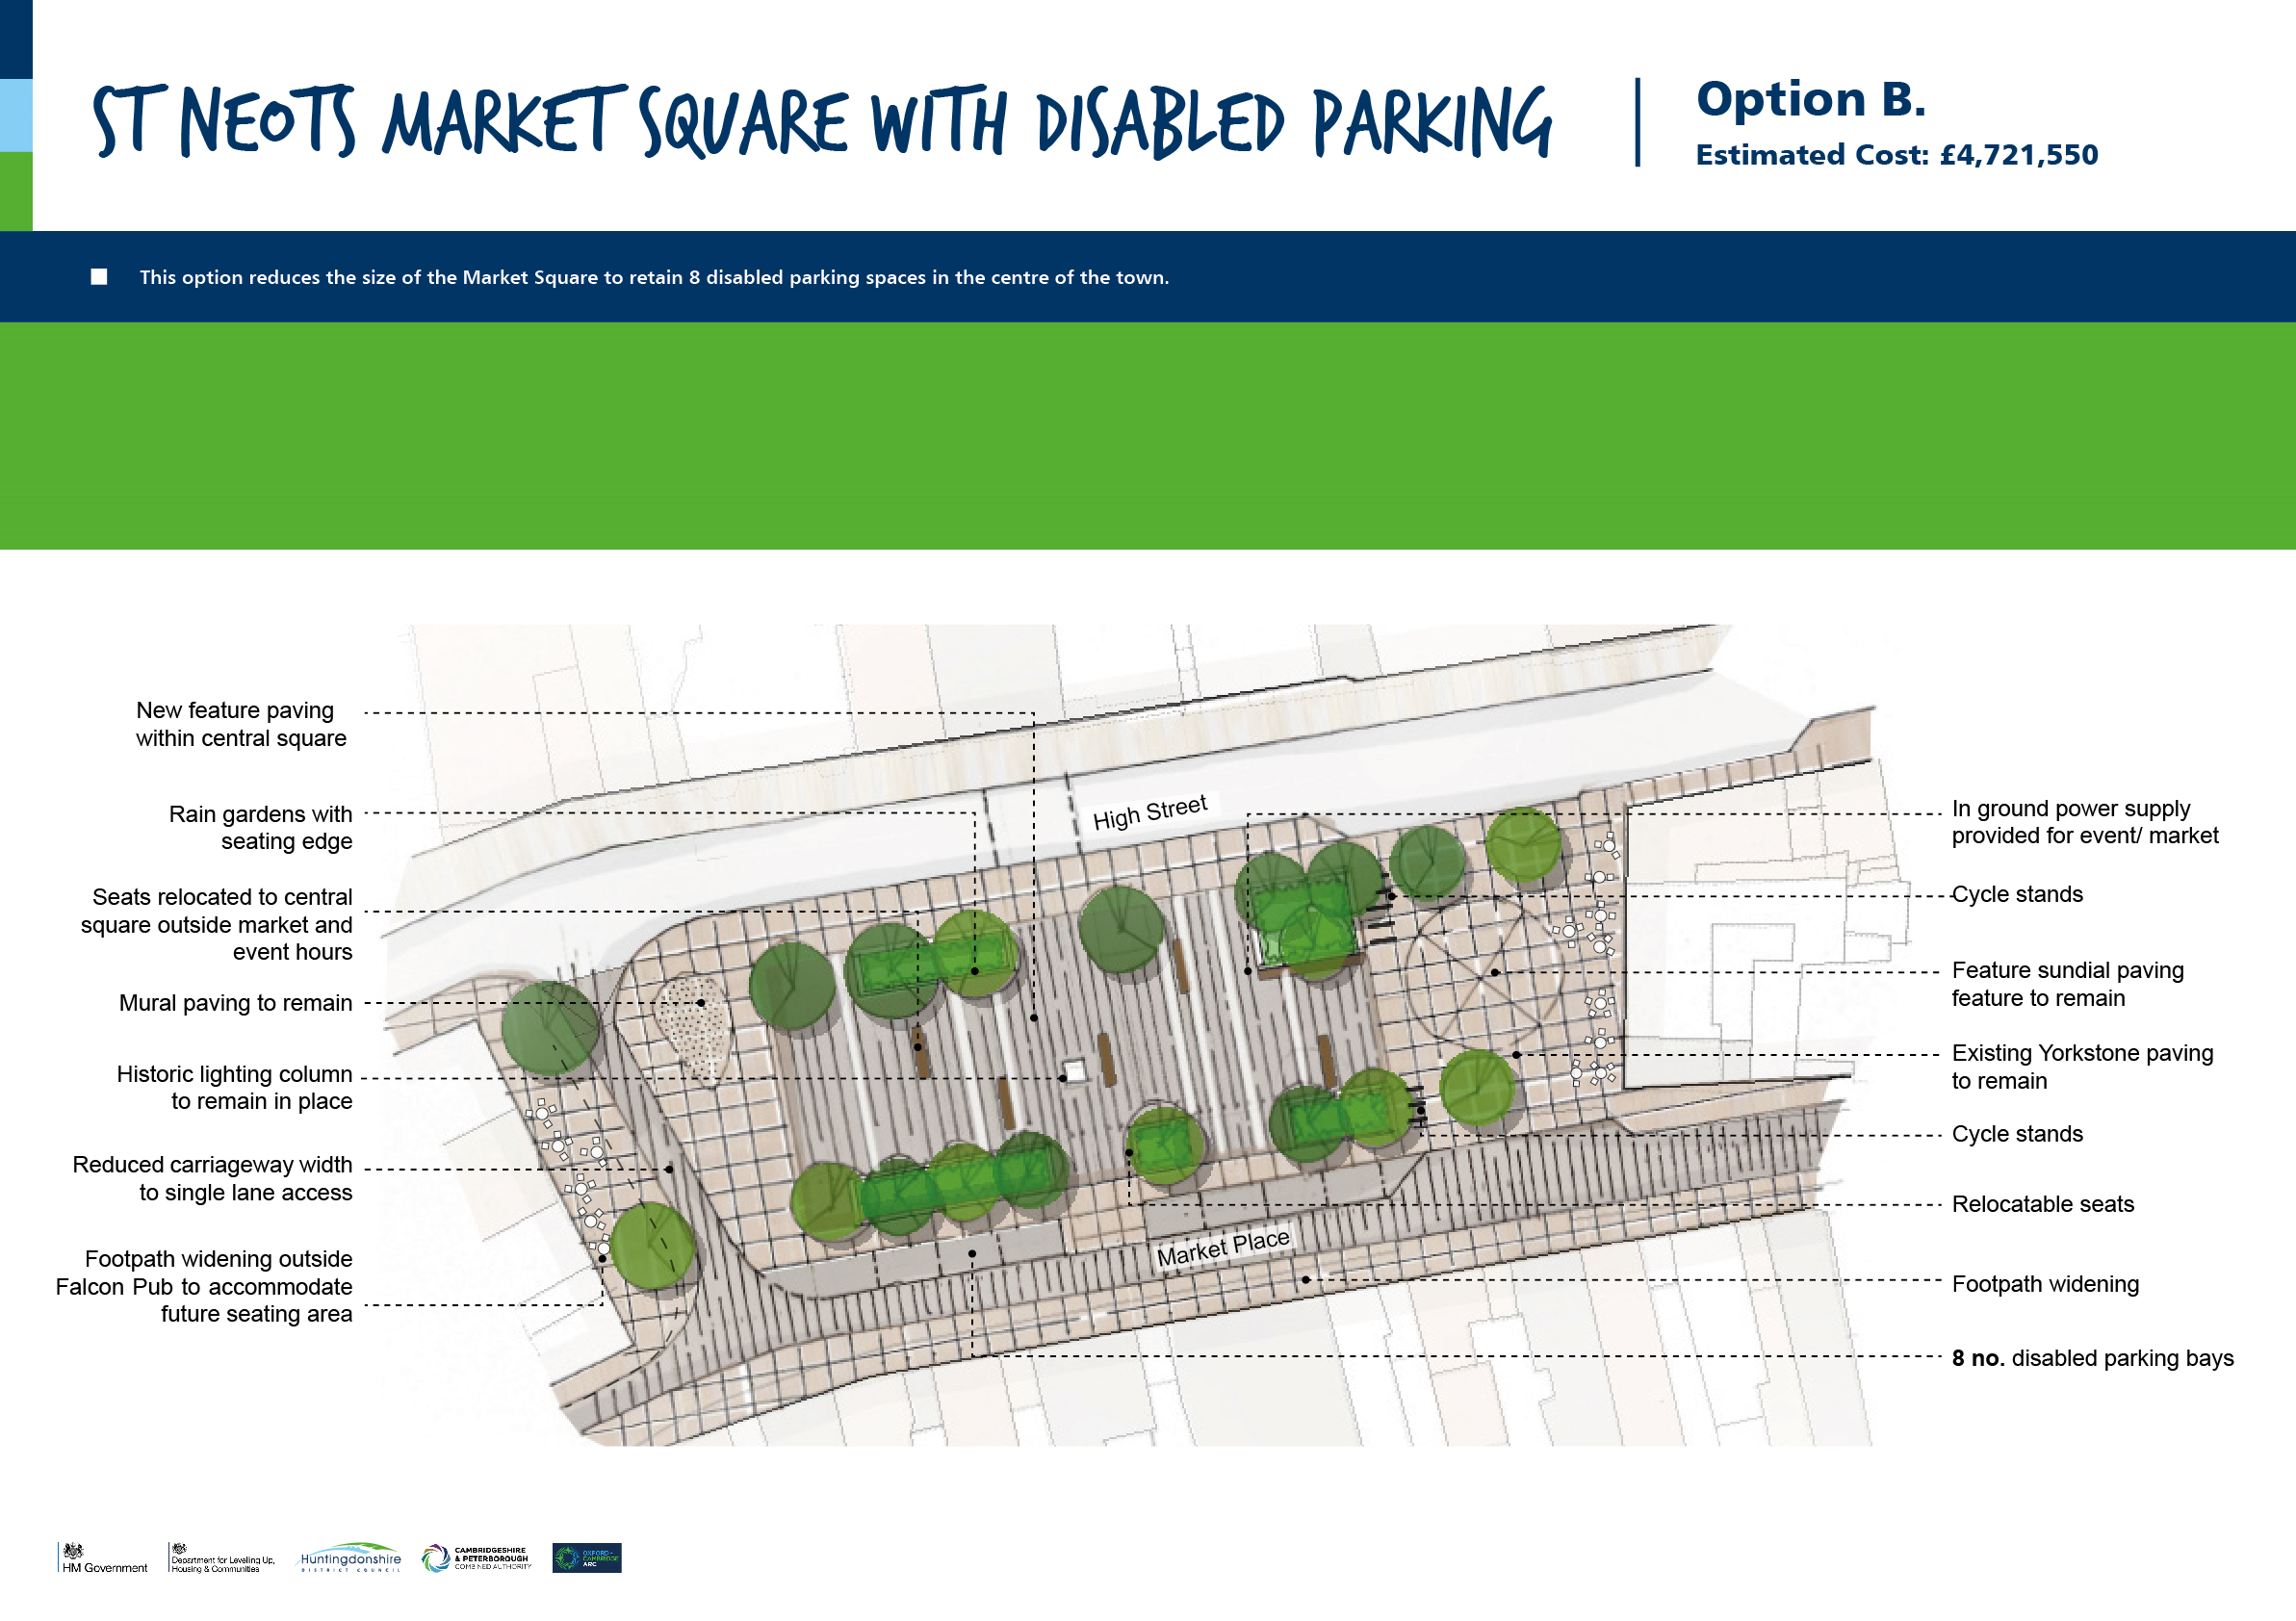 St Neots Market Square with disabled parking. Option B. Estimated cost £4,721,550 This option reduces the size of the Market Quare to retain 8 disabled parking spaces in the centre of the town. Image of map showing new layout